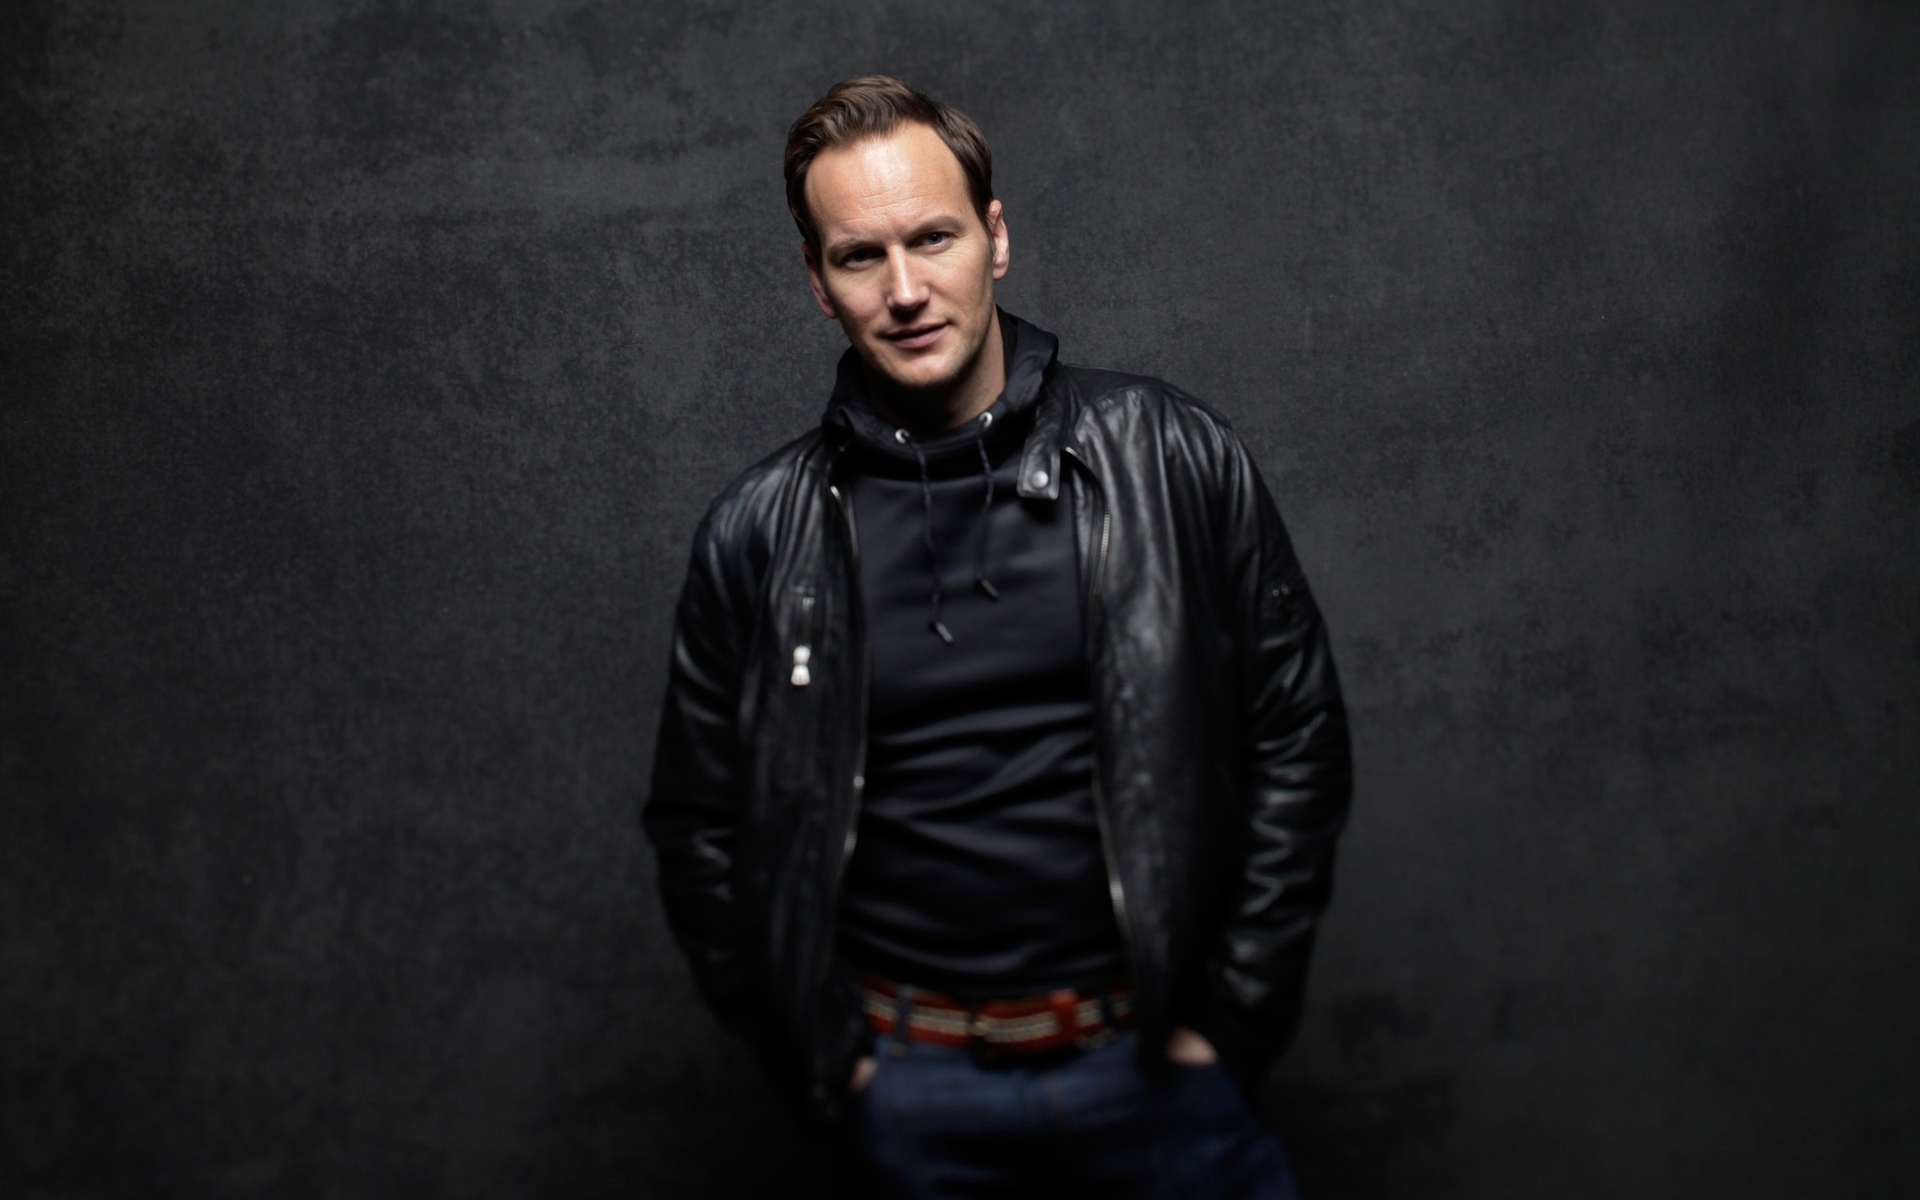  Patrick Wilson  for 1920 x 1200 widescreen resolution